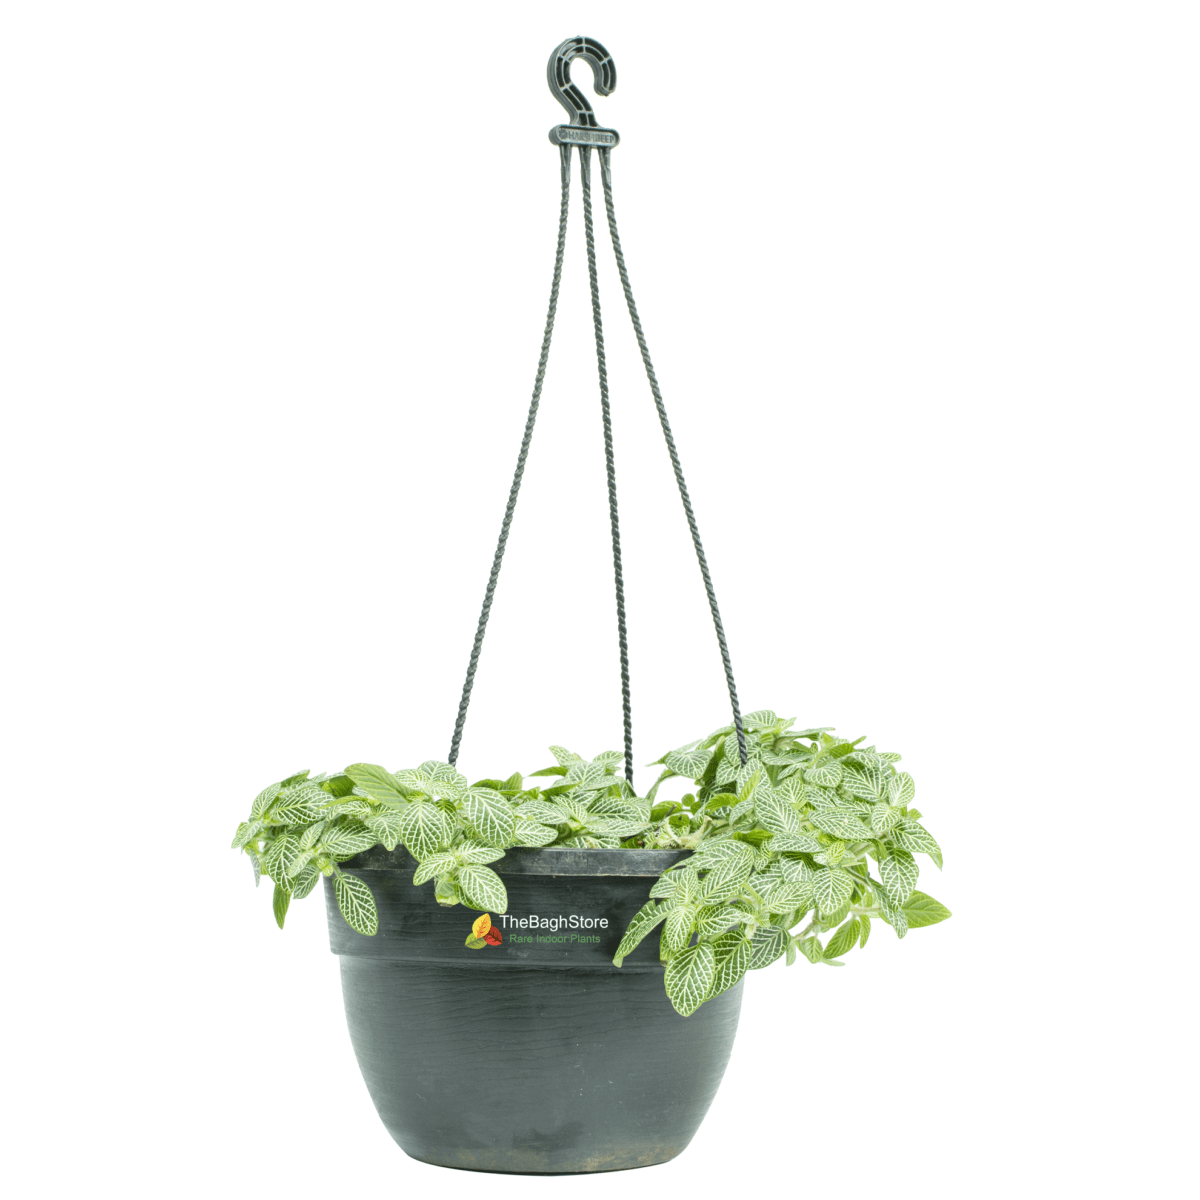 Fittonia Albivenis, White Nerve Plant in 6 inch Hanging Pot - Plant